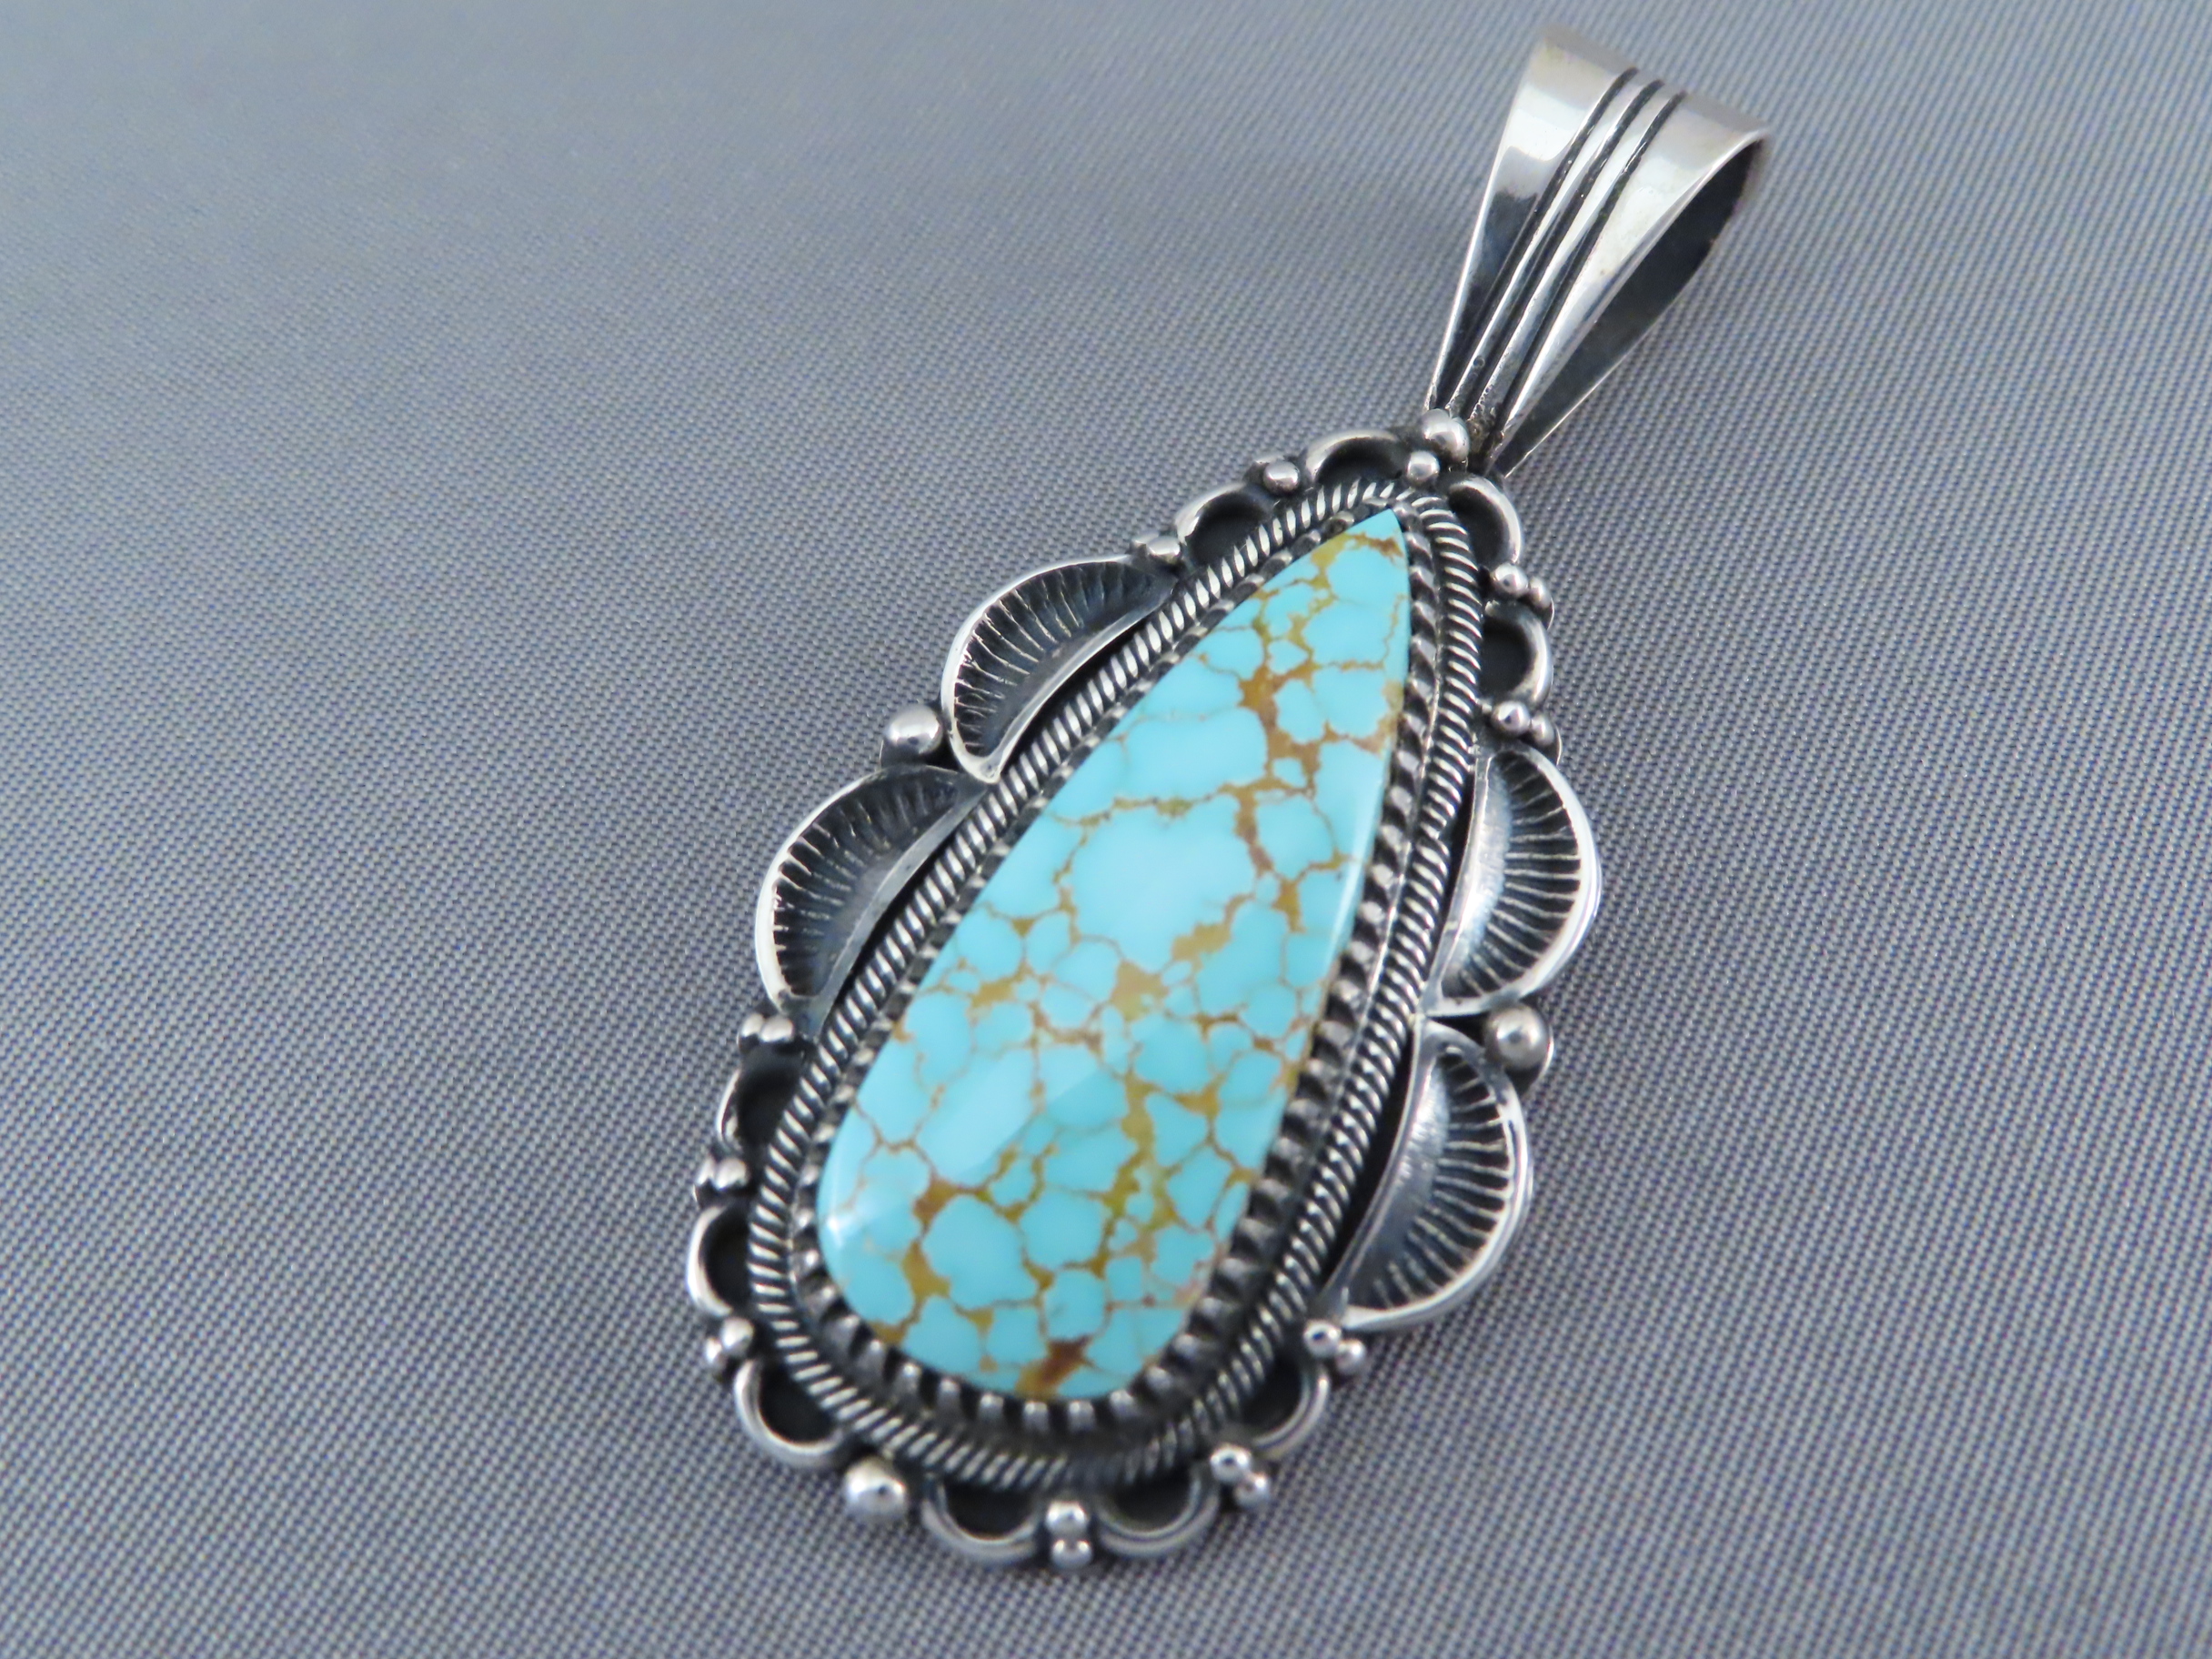 Turquoise Jewelry - Number Eight Turquoise Pendant by Navajo jewelry artist, Delbert Gordon FOR SALE $750-